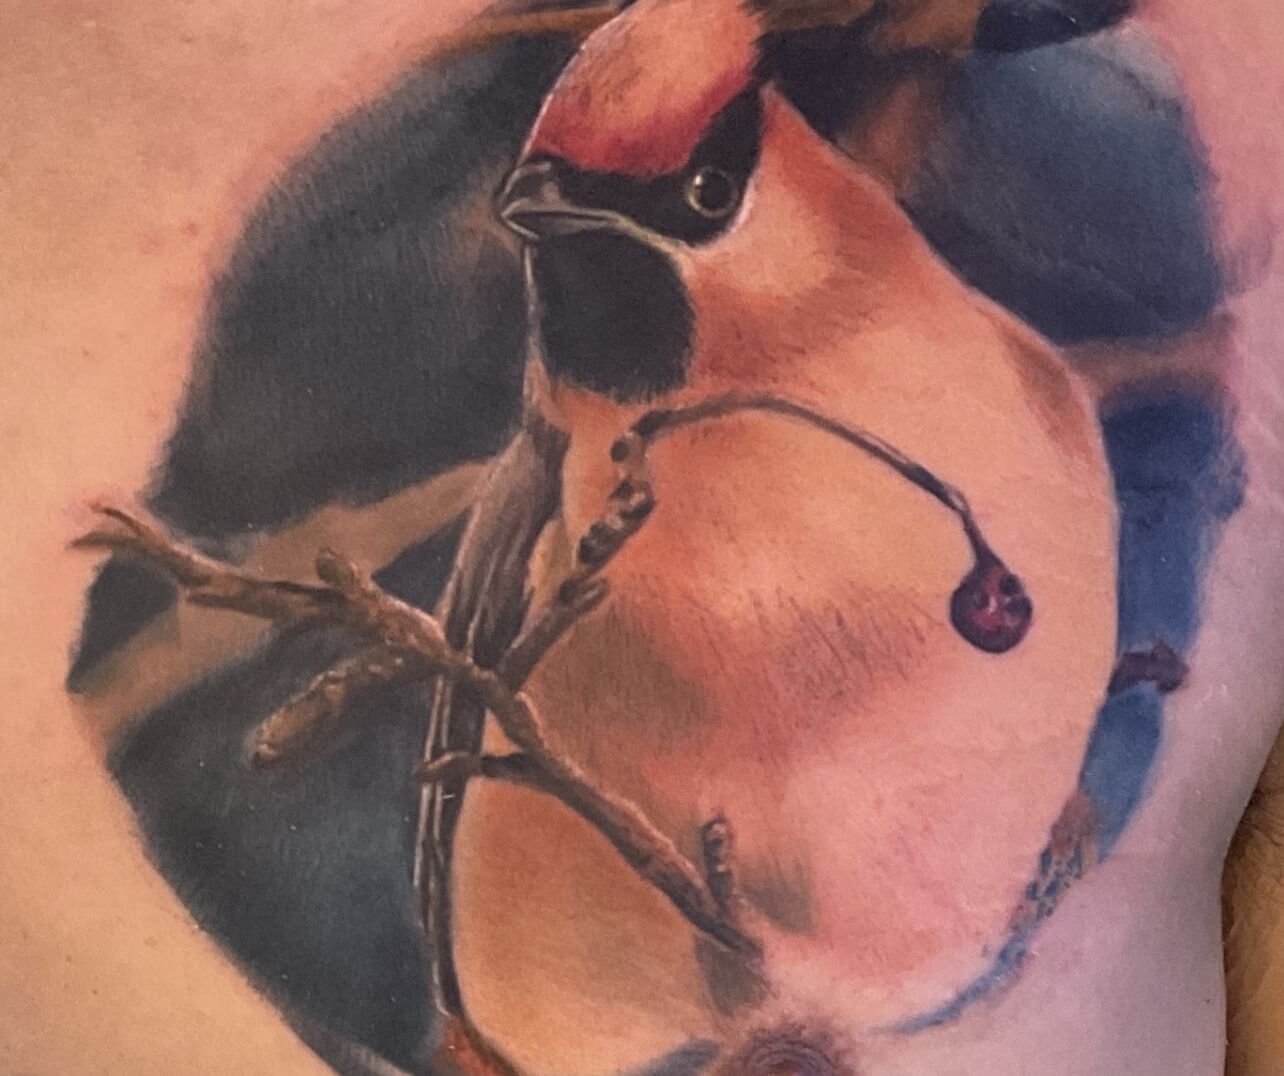 Bird Photo-realism colored animal tattoo by DB. Wyte at Iron Palm Tattoos in downtown Atlanta. Call 404-973-7828 or stop by for a free consultation. Walk-Ins are welcome.